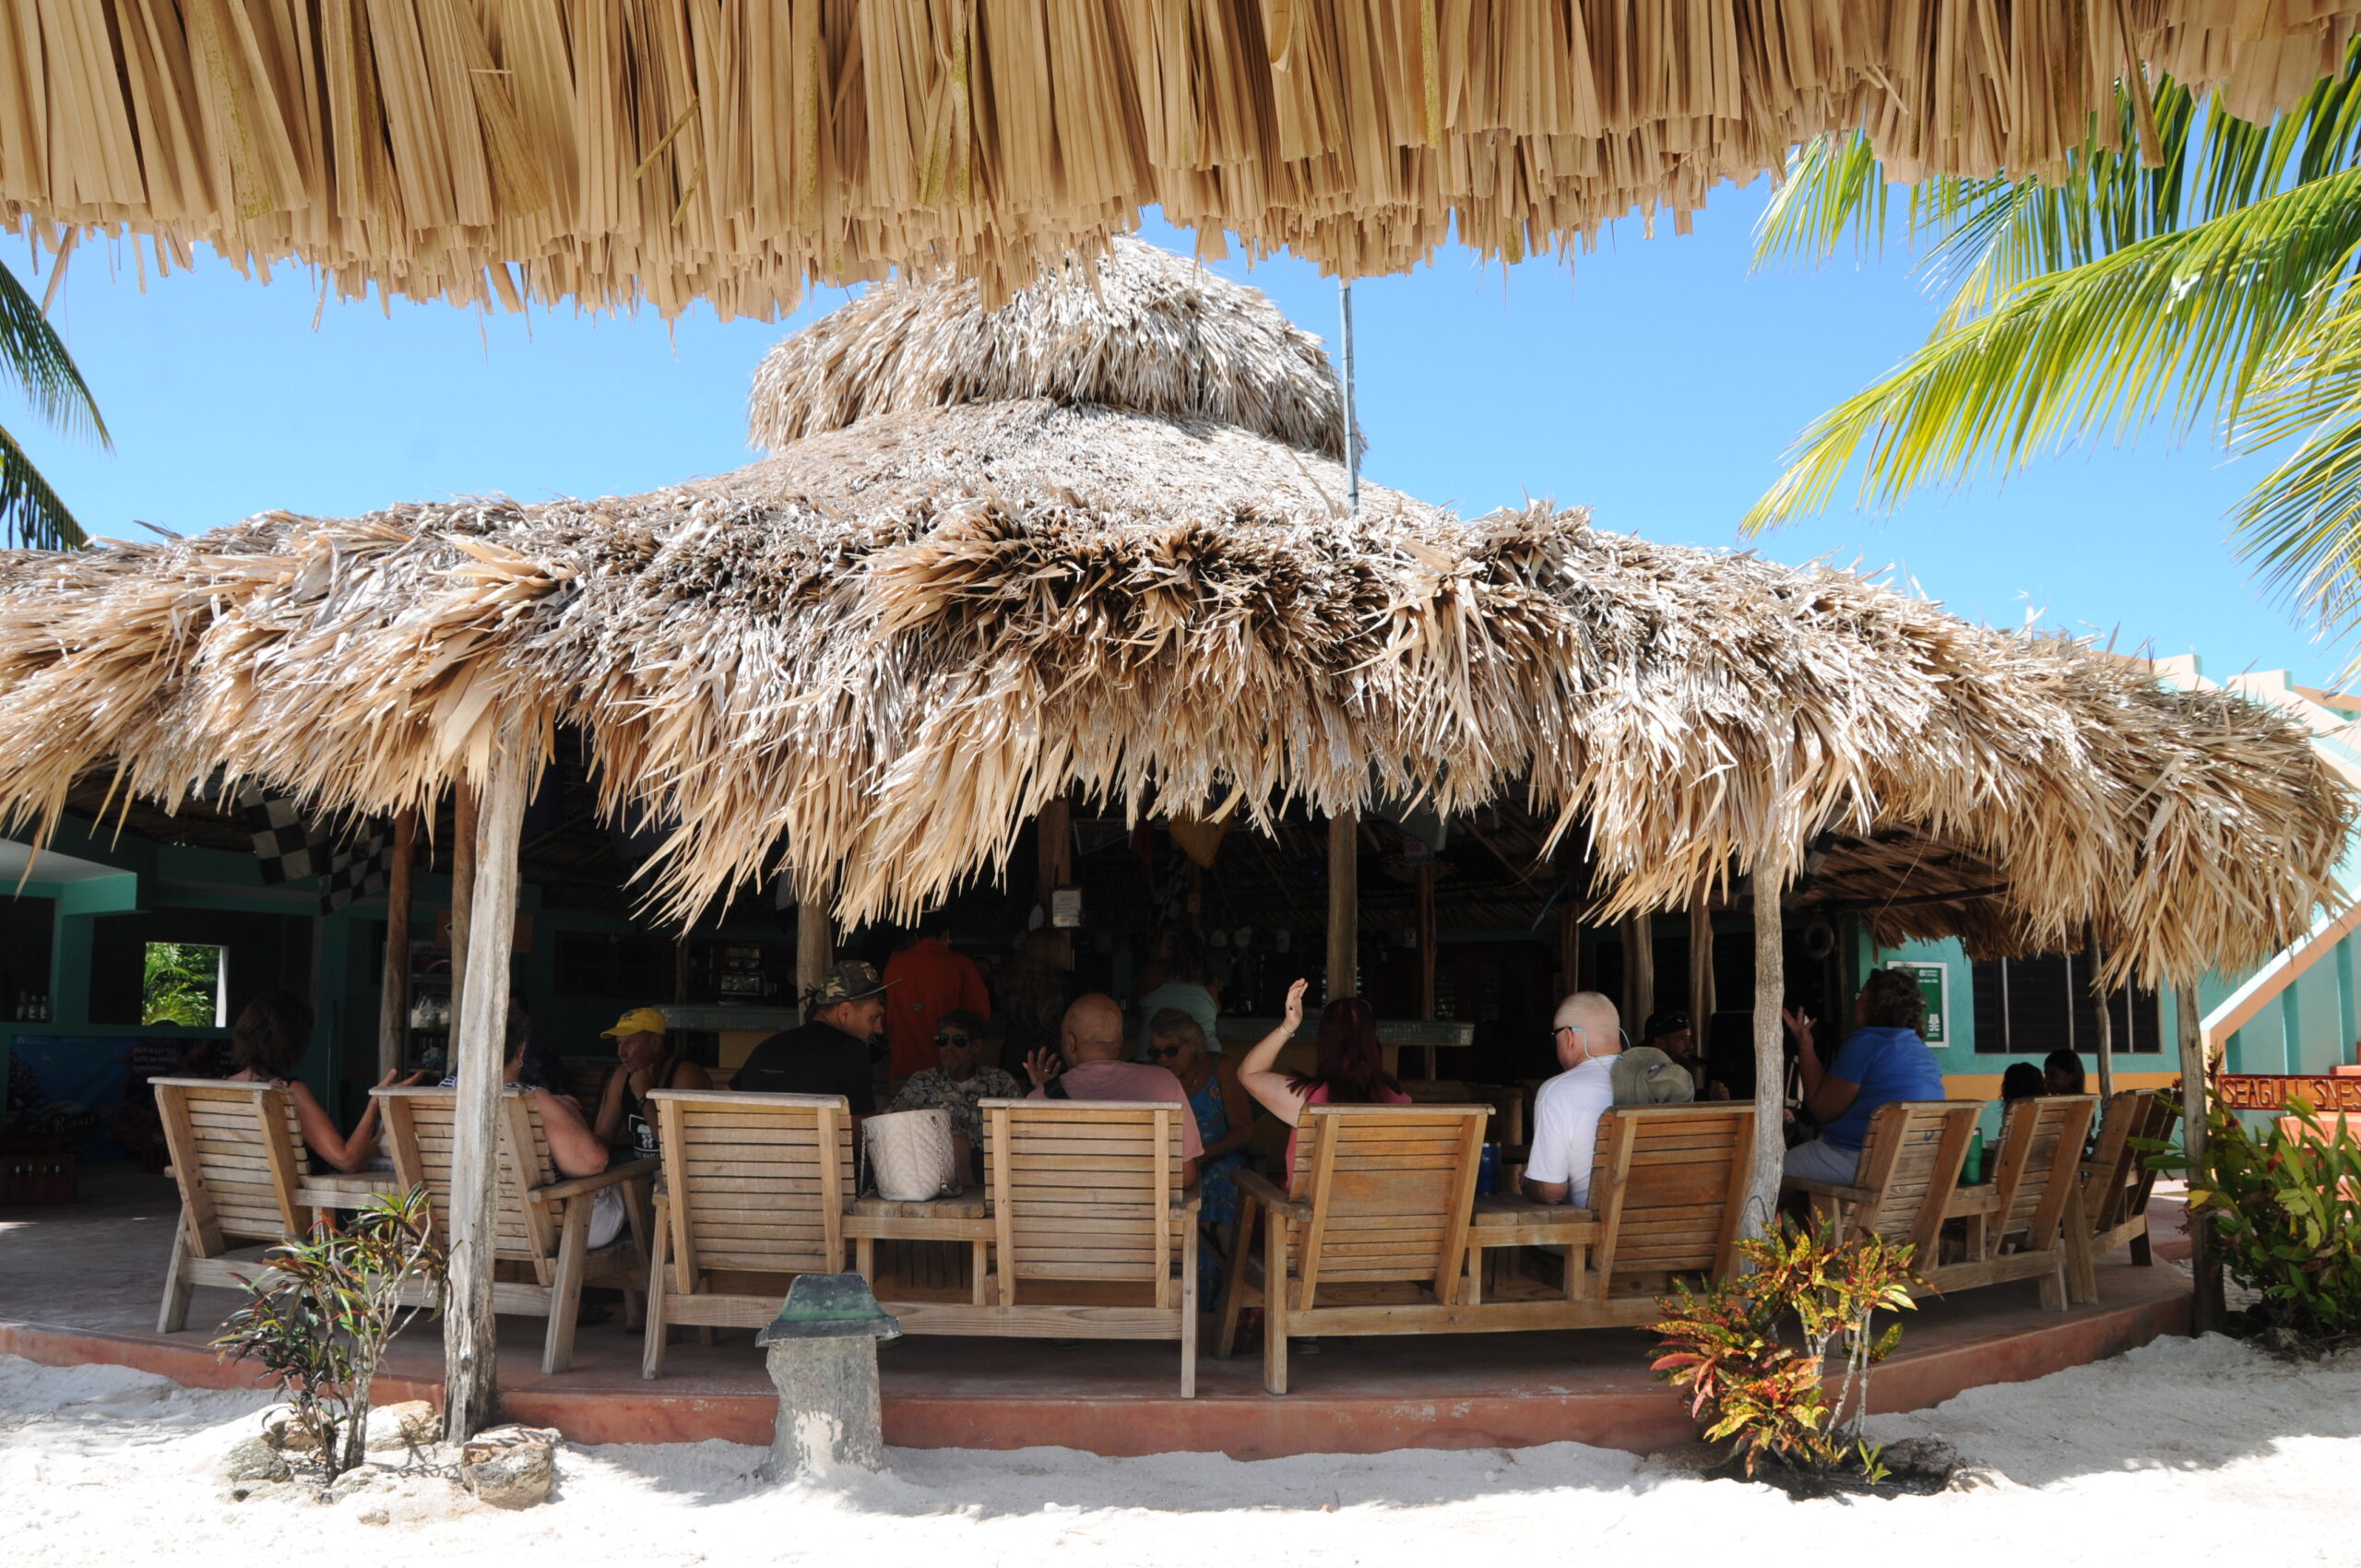 Hotel and Bar, Successful Business For Sale, Belize, Caribbean